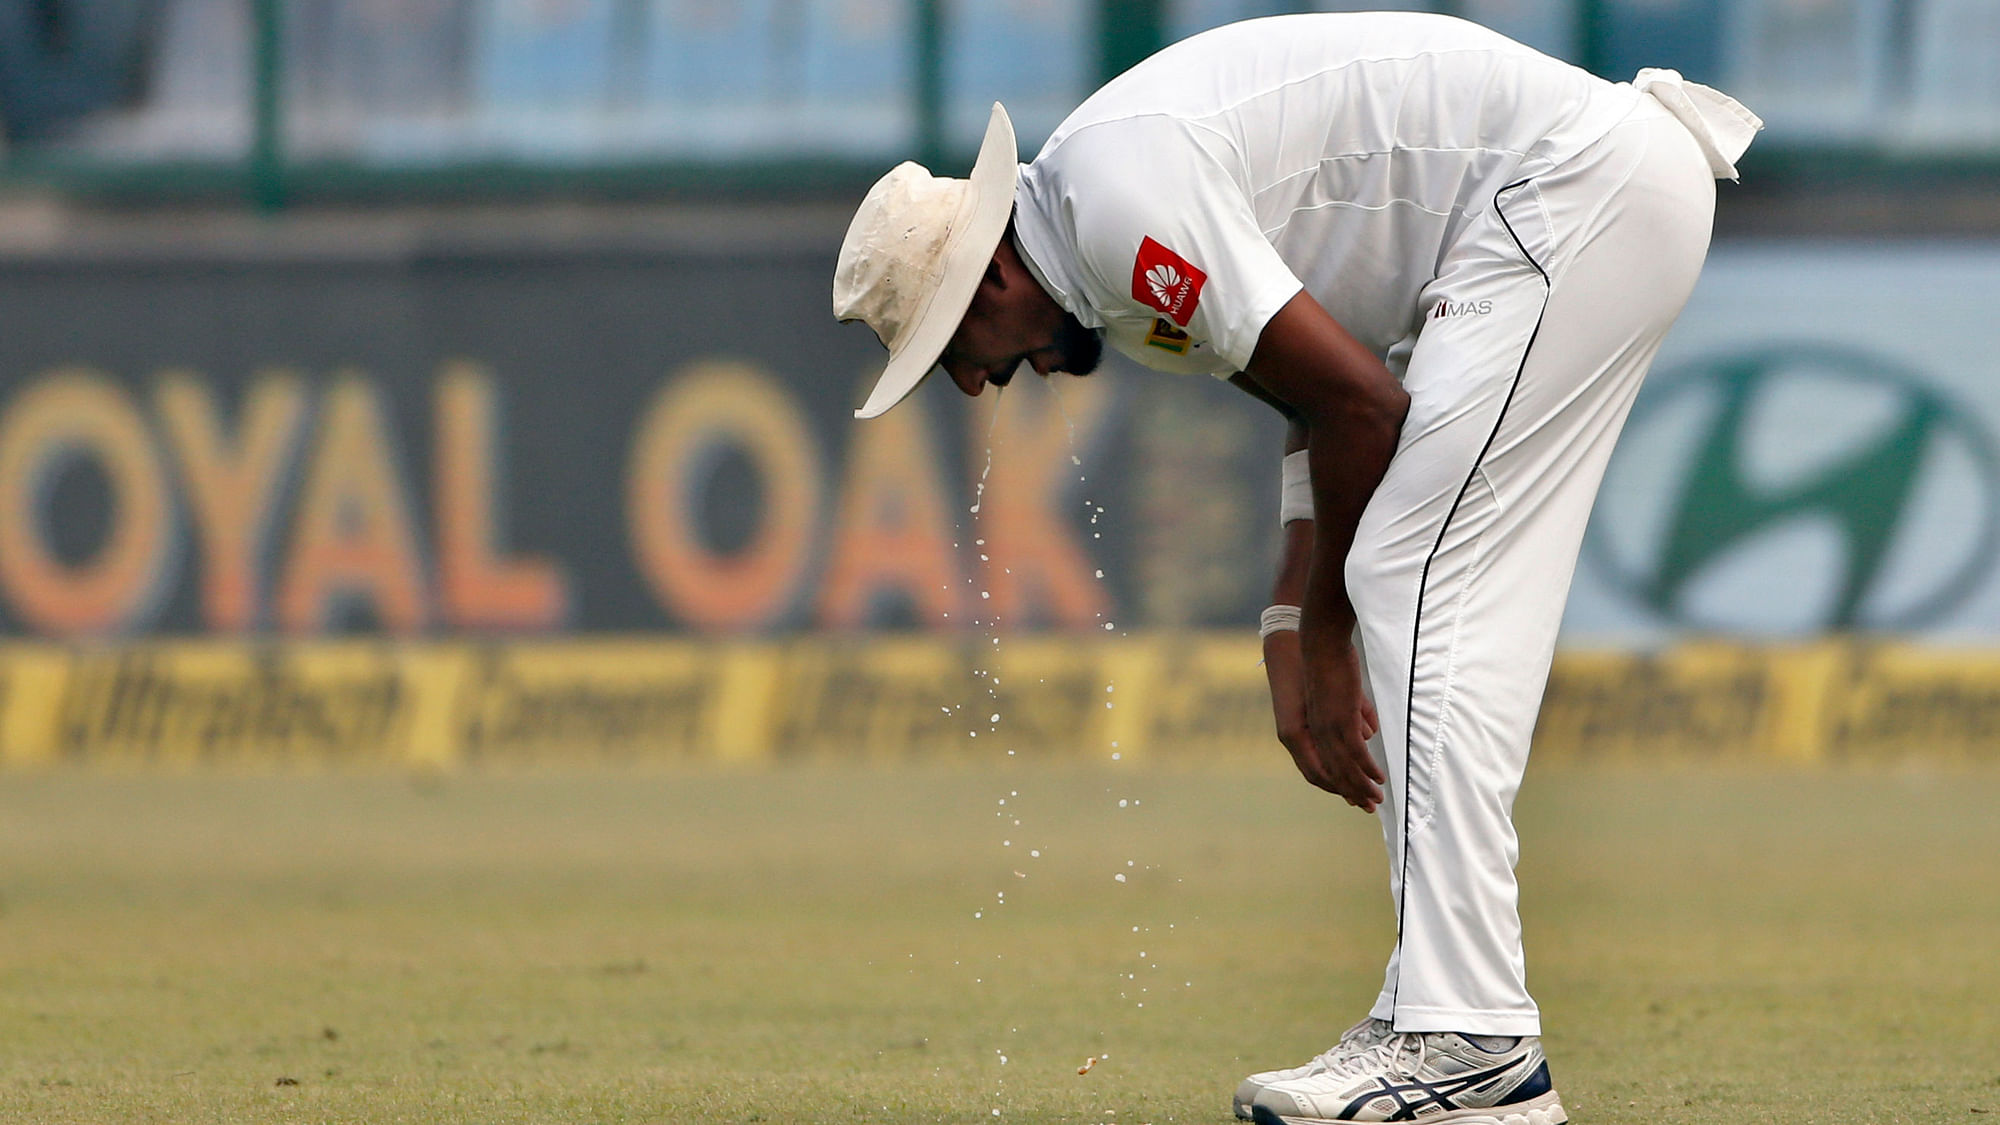 Suranga Lakmal had bowled only three overs when he was seen vomiting on the field